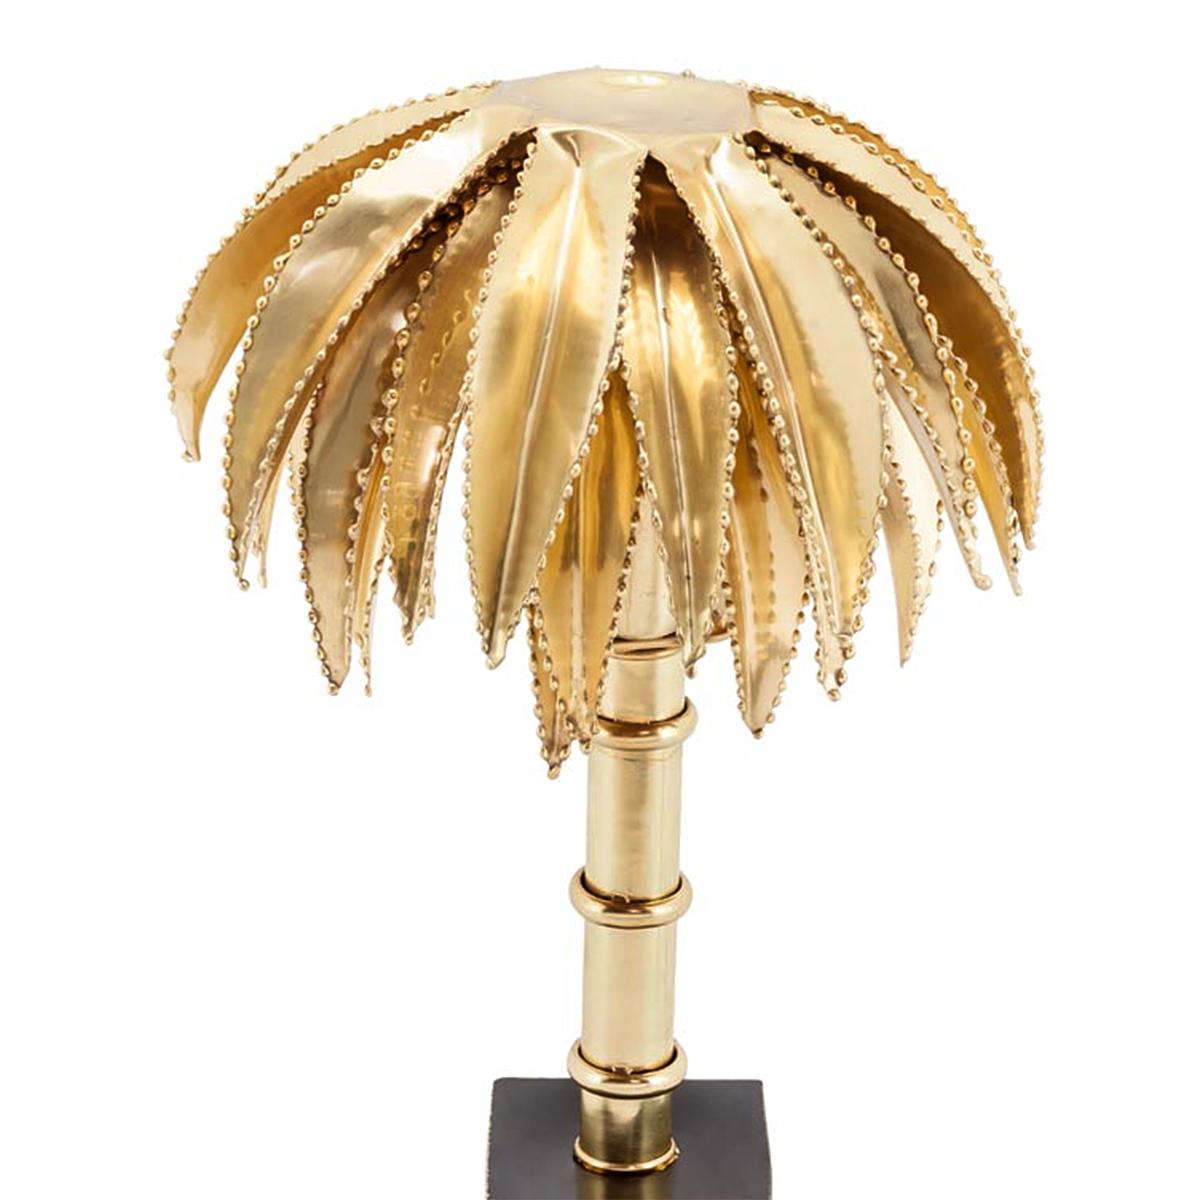 Table lamp brass palms all made in solid
brass in polished finish. On blackened base.
Also available in chrome finish.